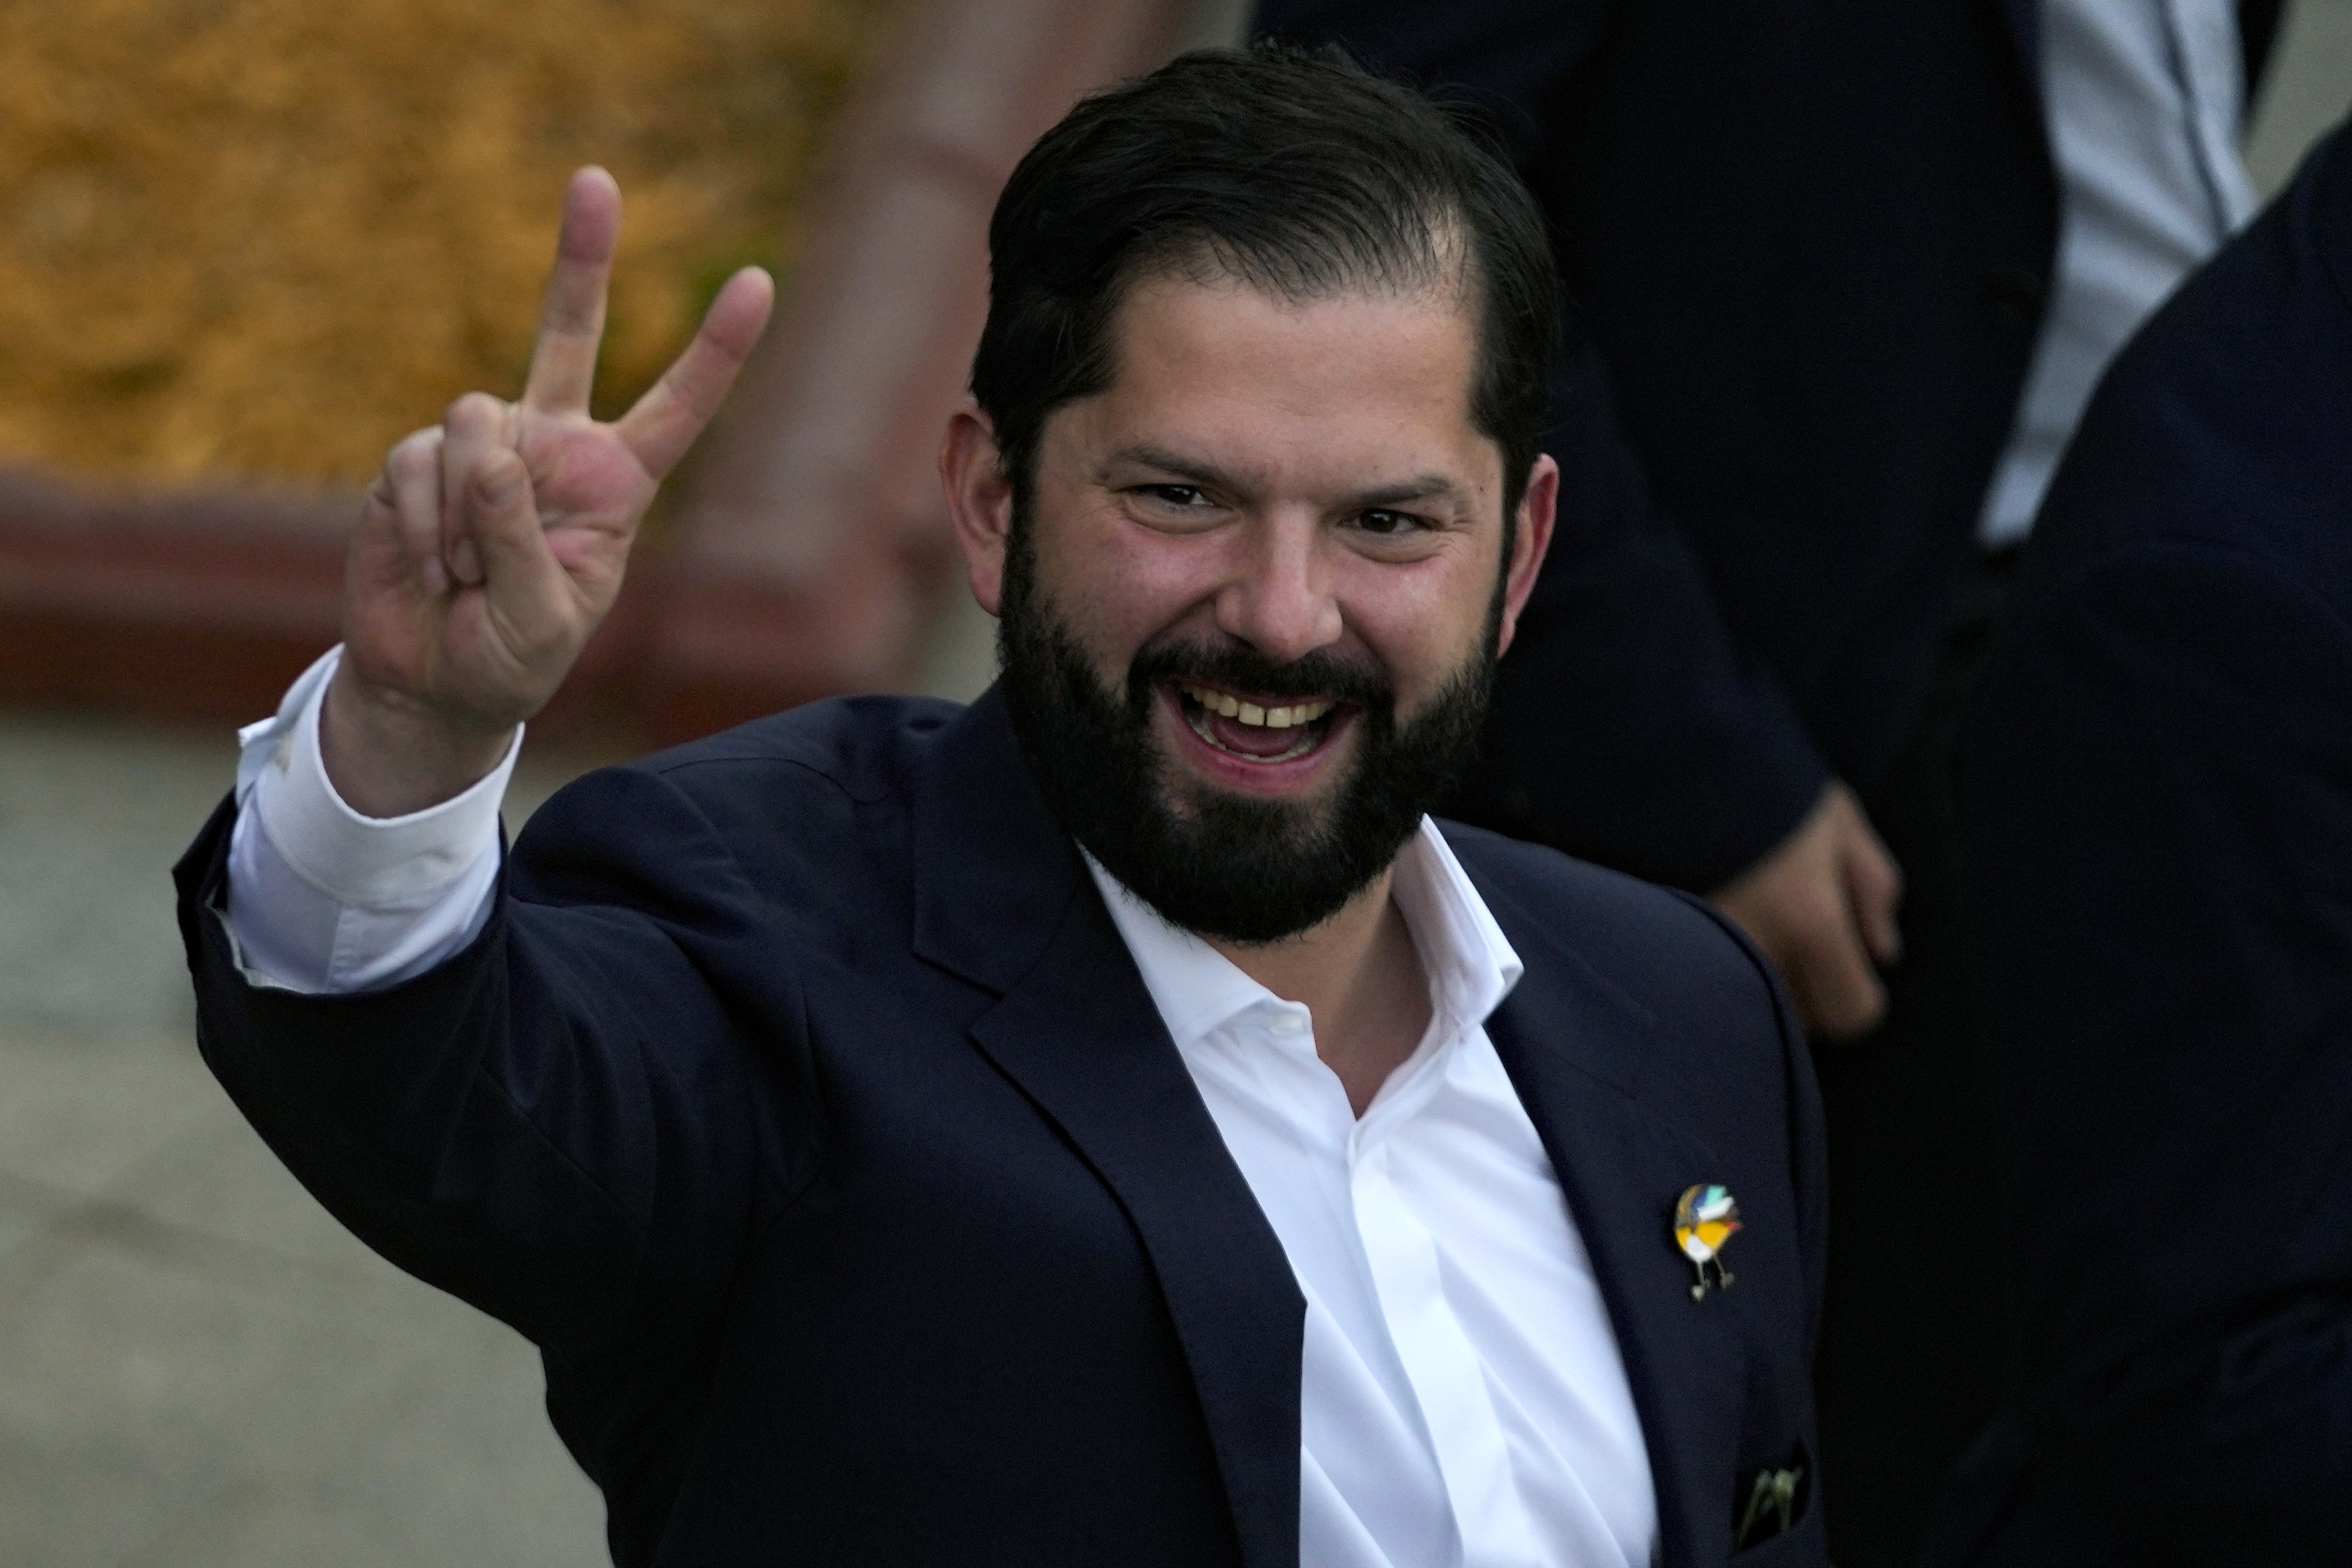 Gabriel Boric was elected Chile’s president in 2021. Photo: AP